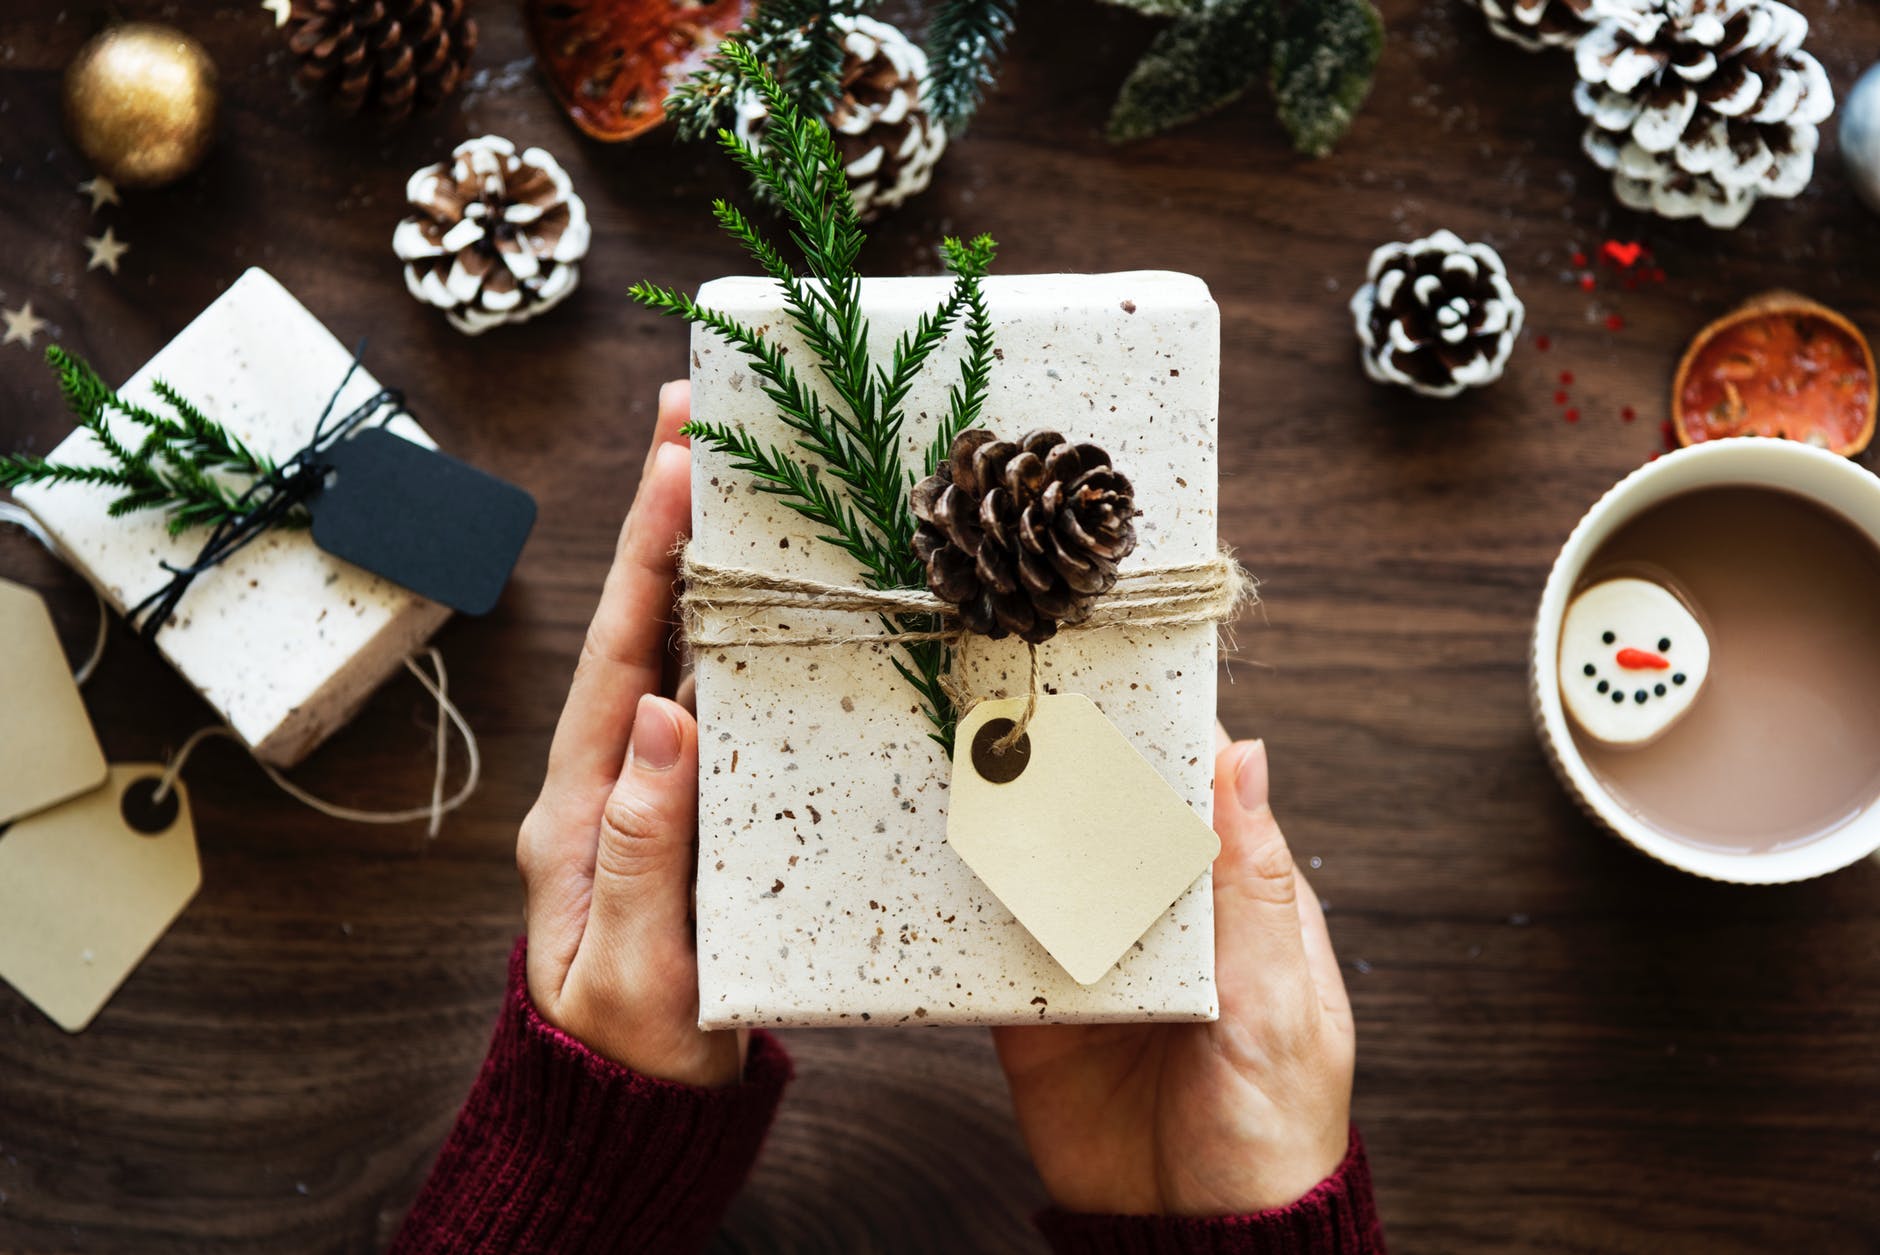 6 Health-Related Gifts That Keep On Giving